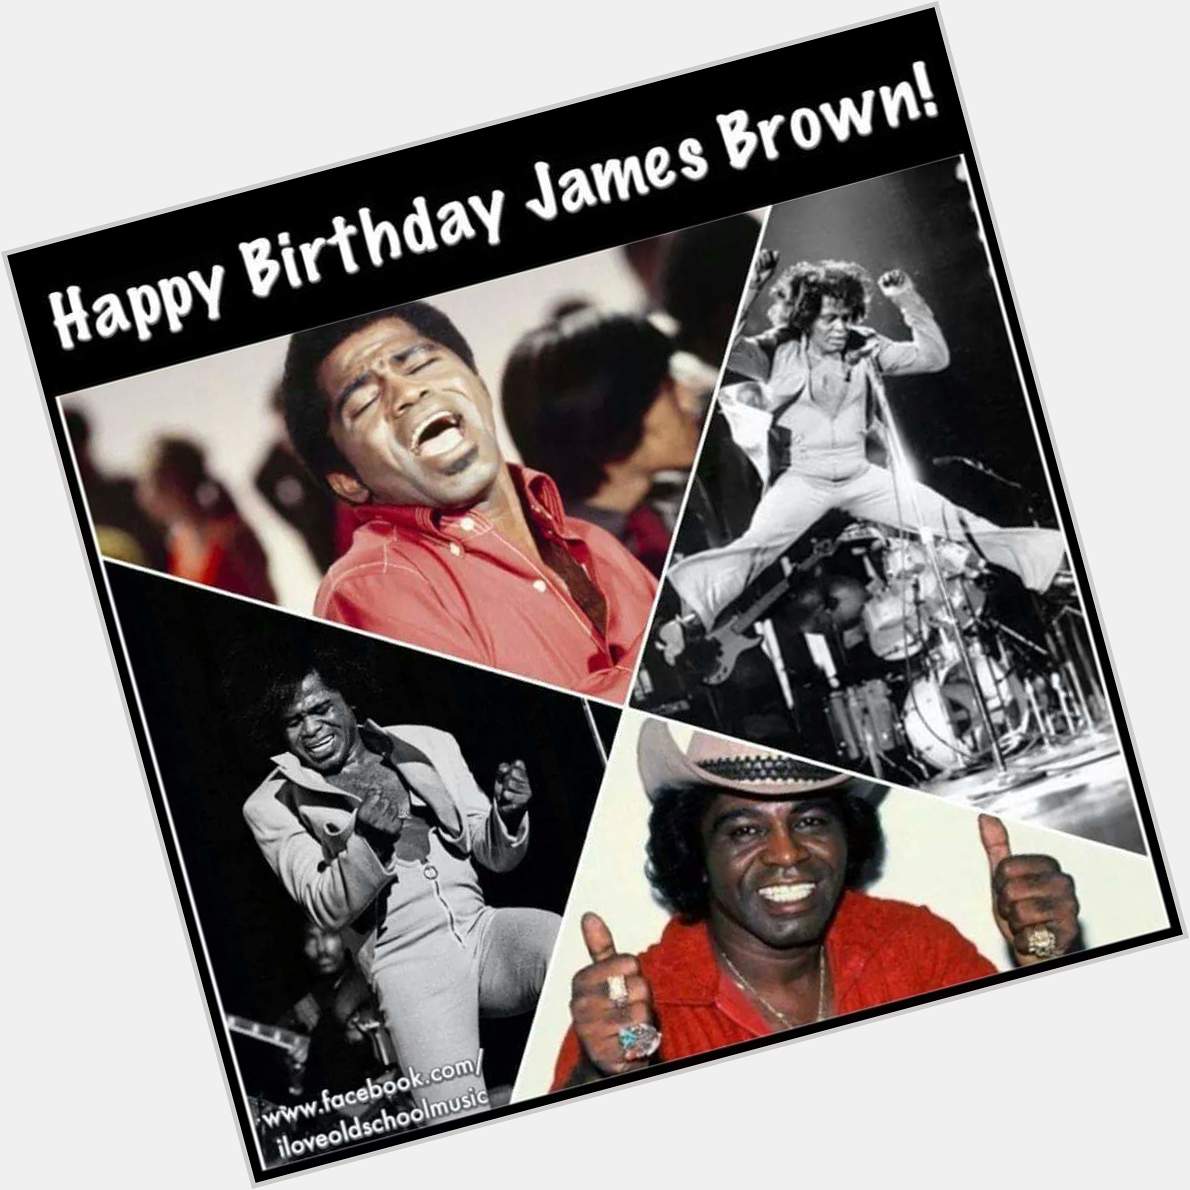 Yesterday was the Godfather of Soul Birthday Happy Heavenly Birthday to the one & only James Brown 5/3/1933 RIH 